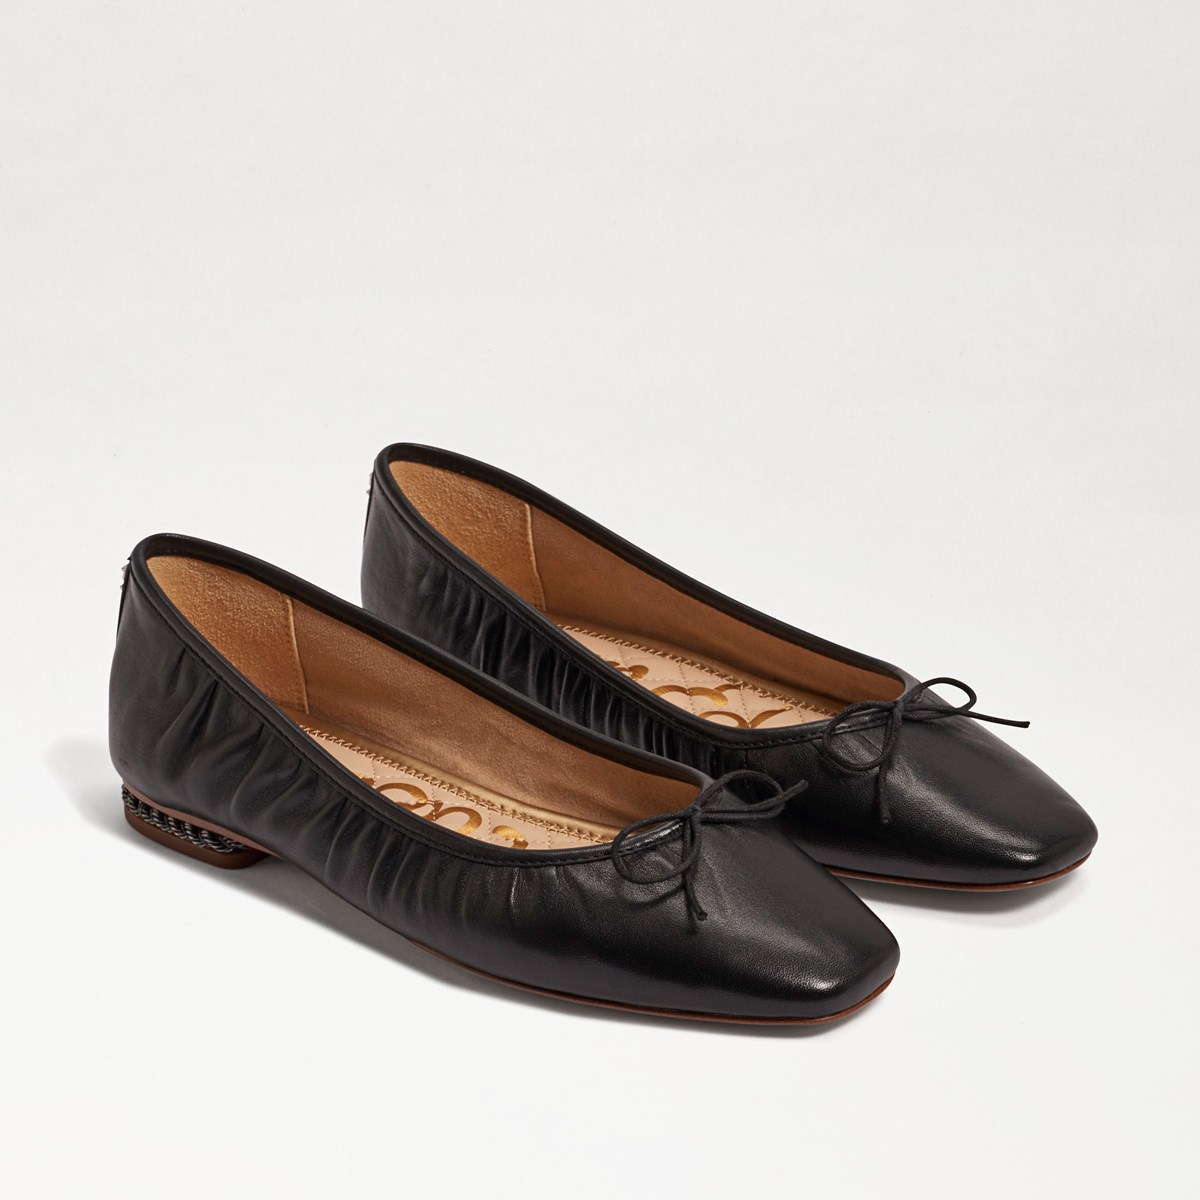 Buy > leather women flats > in stock